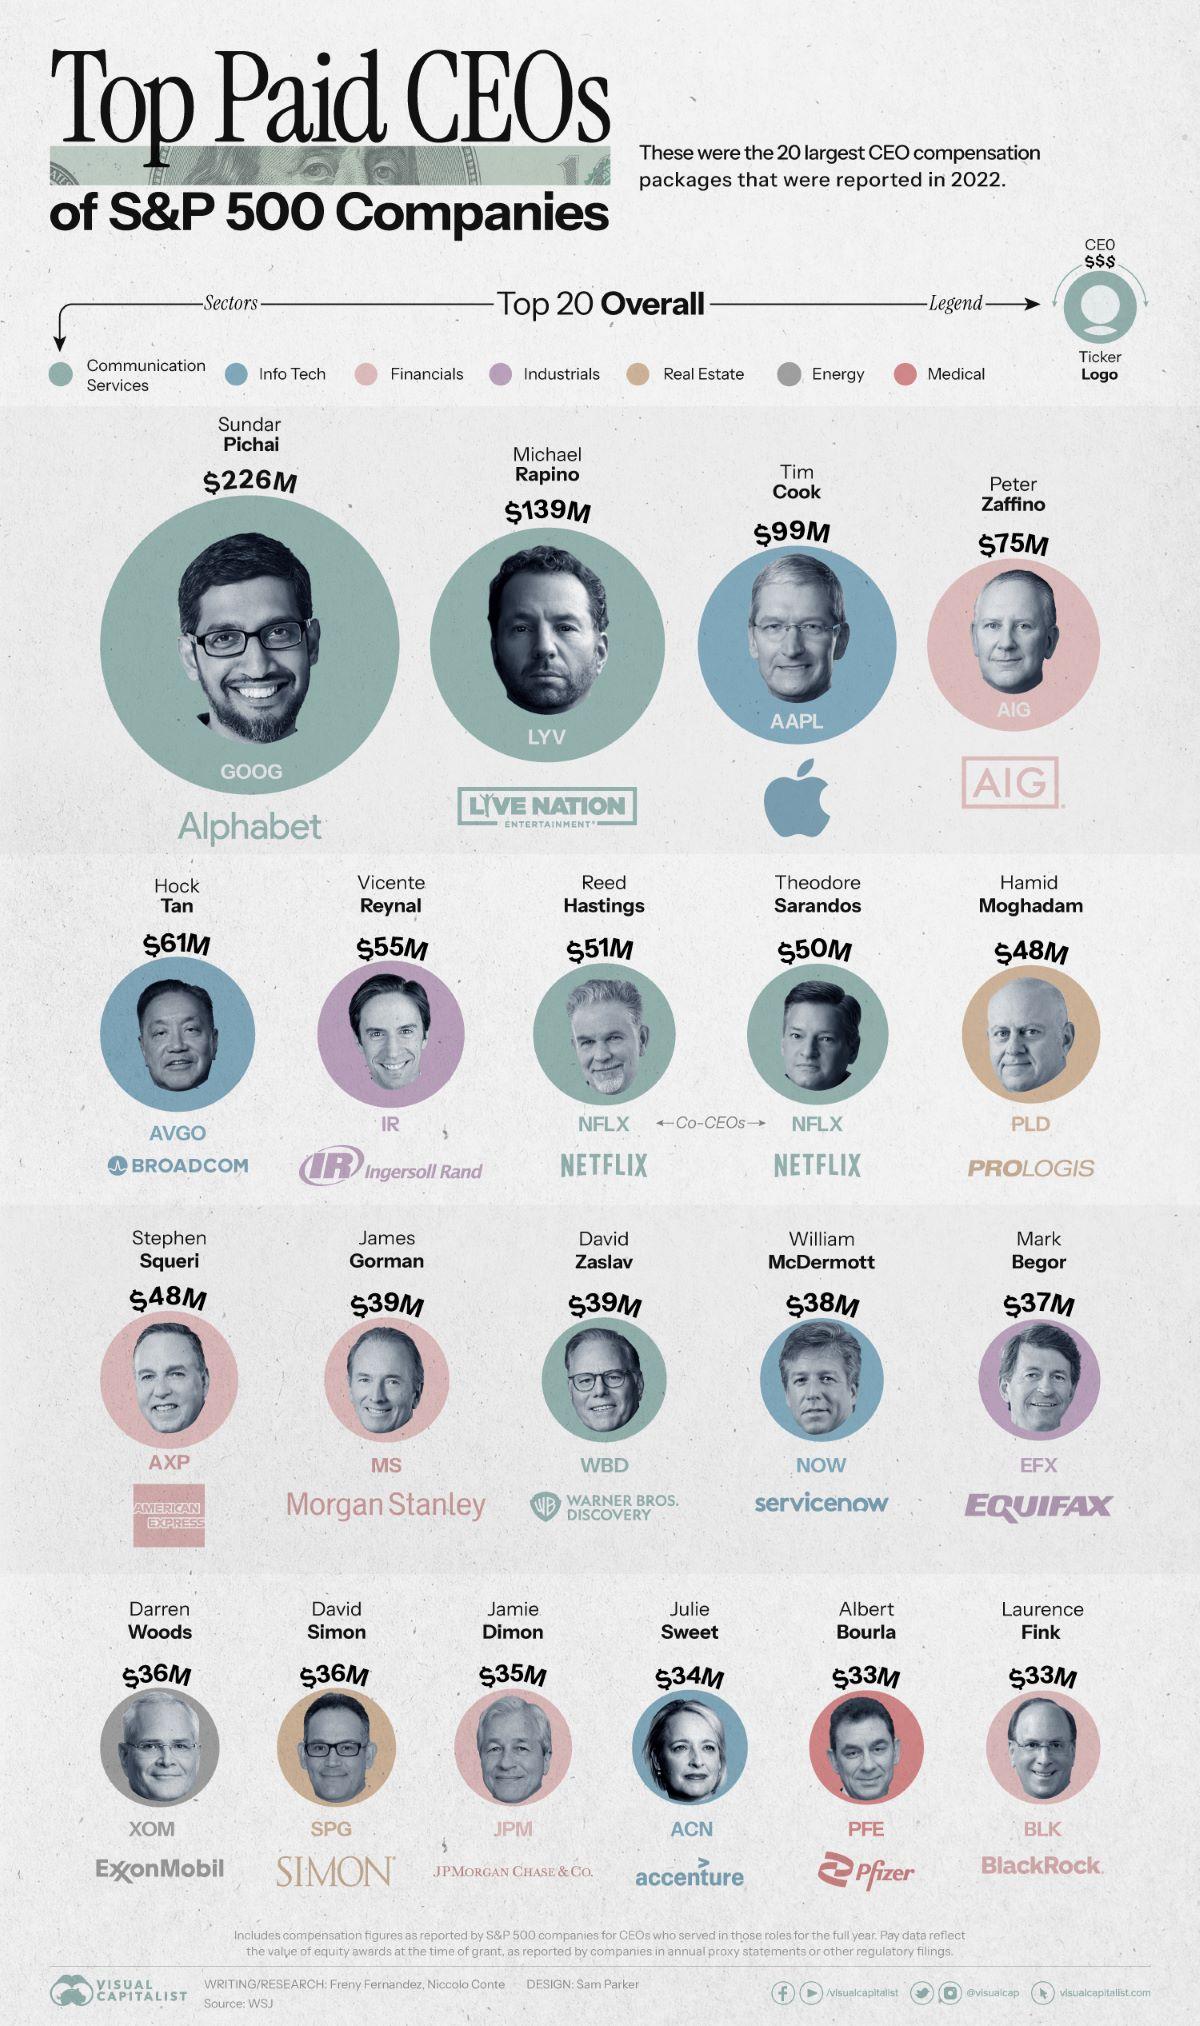 Highest Paid CEOs of S&P 500